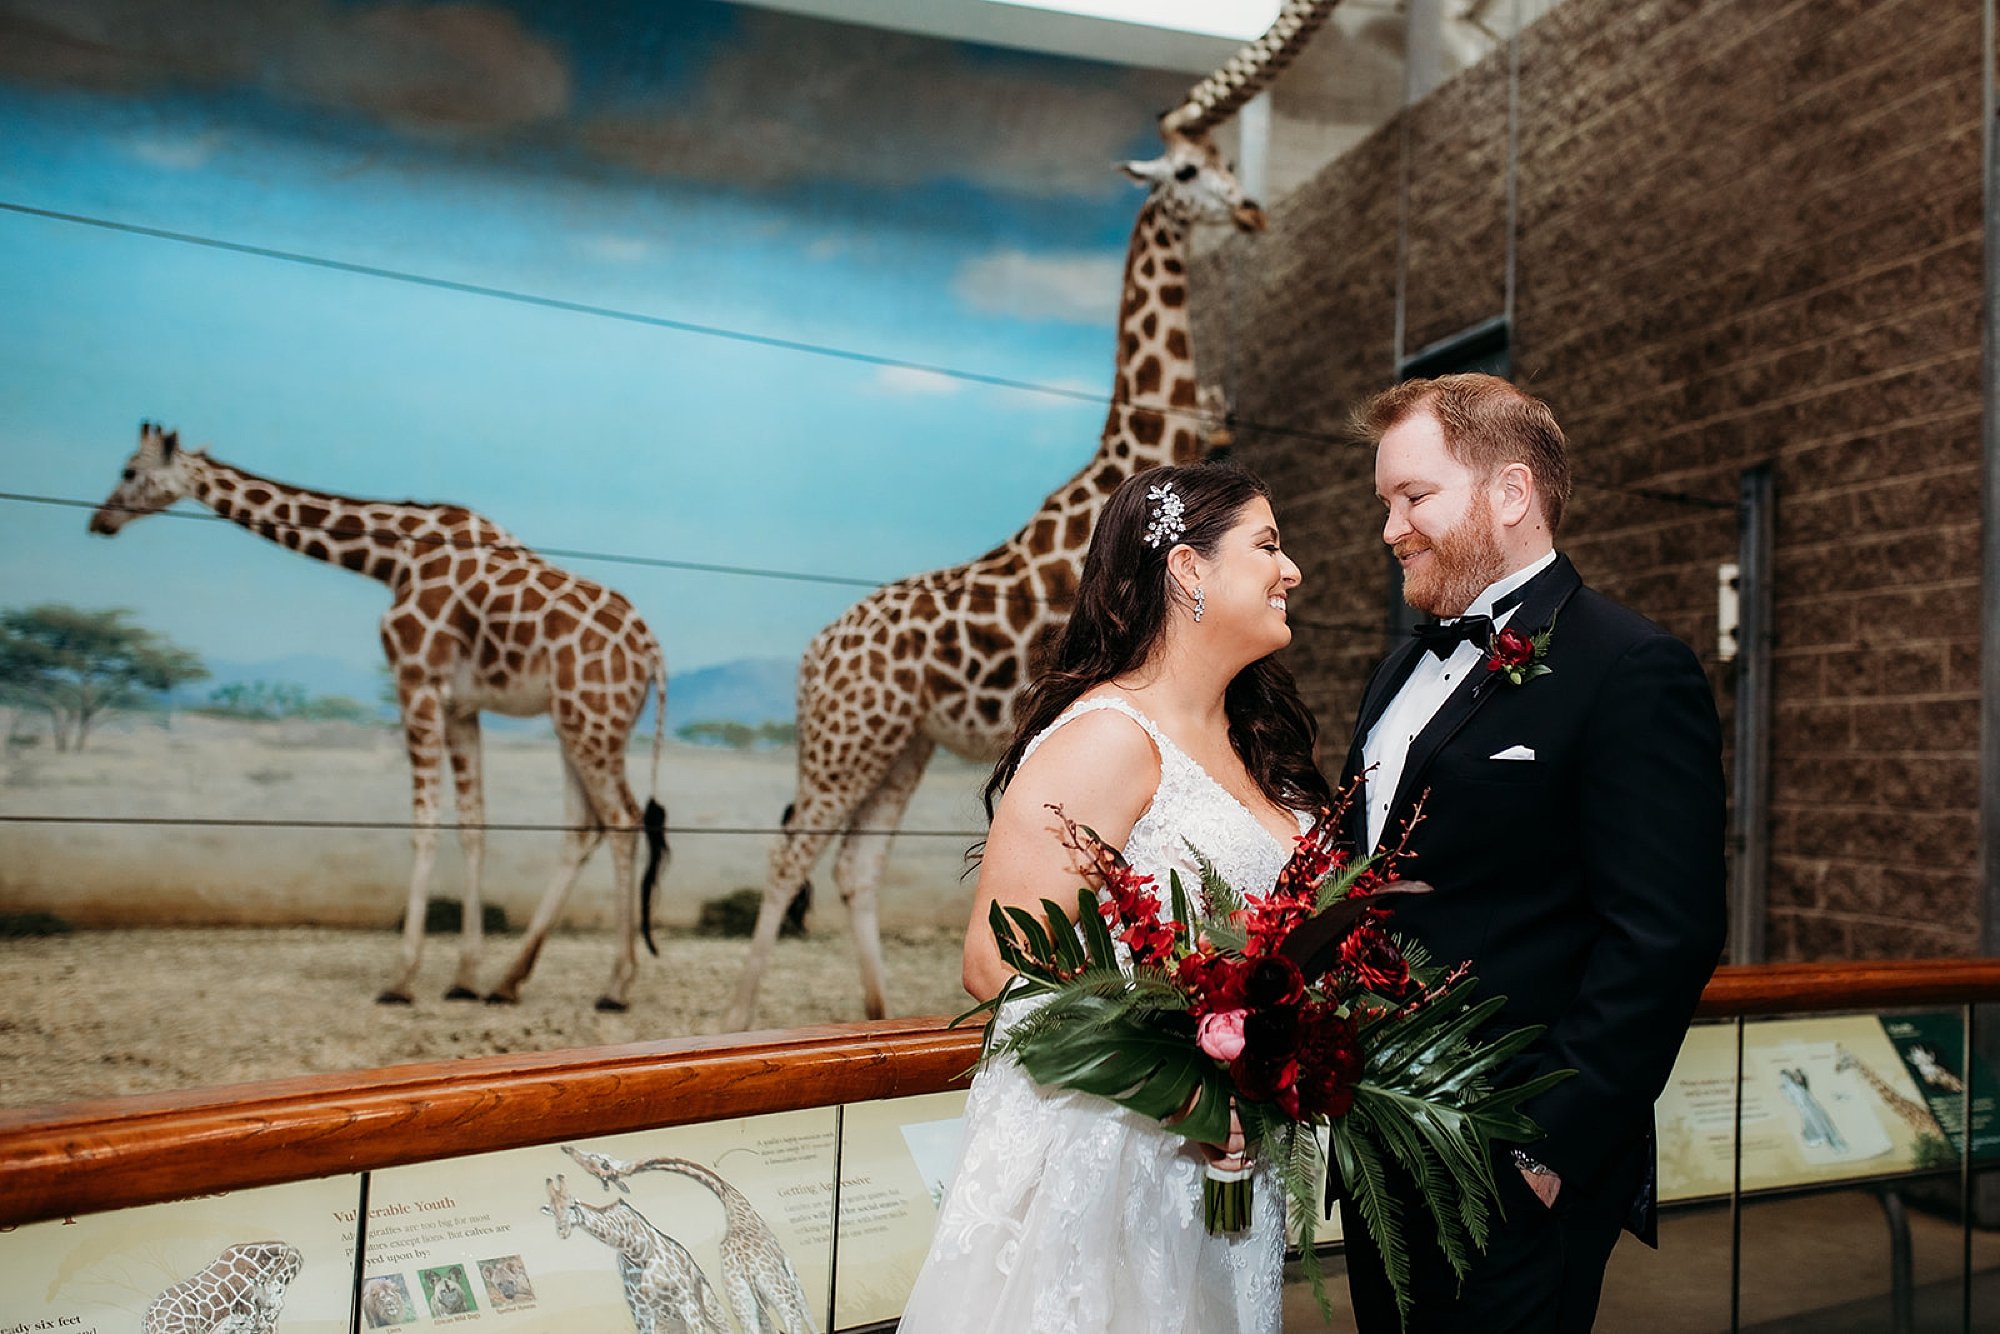 bride smiles at groom standing by giraffe exhibit at the Bronx Zoo